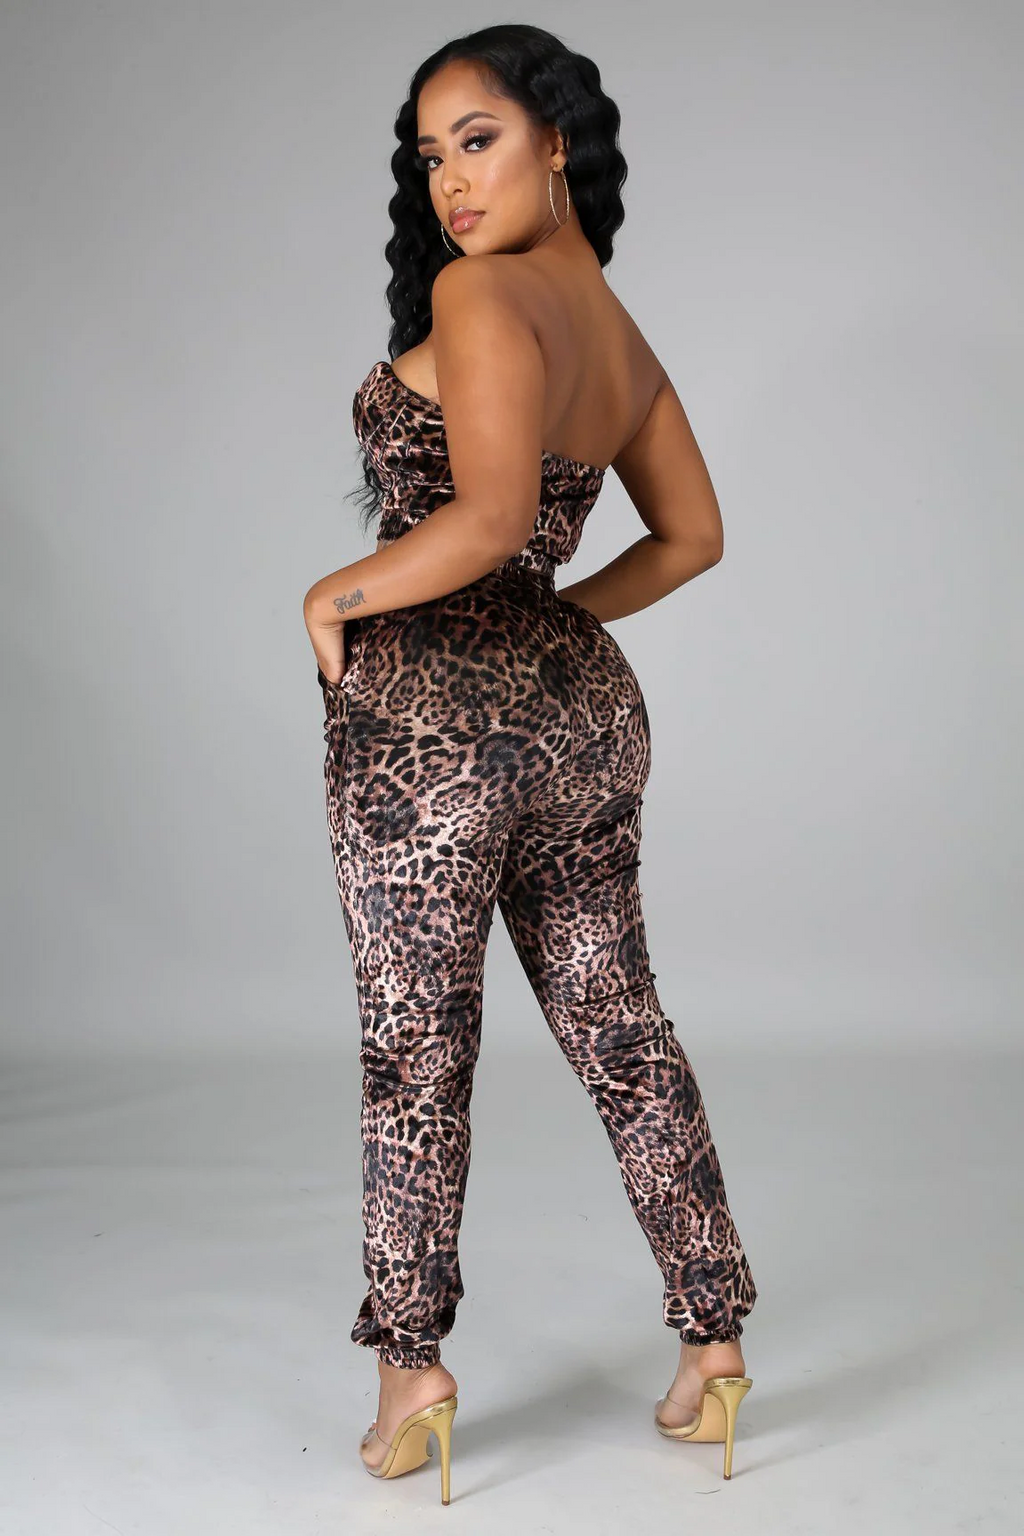 Your Wild Side Pant Set